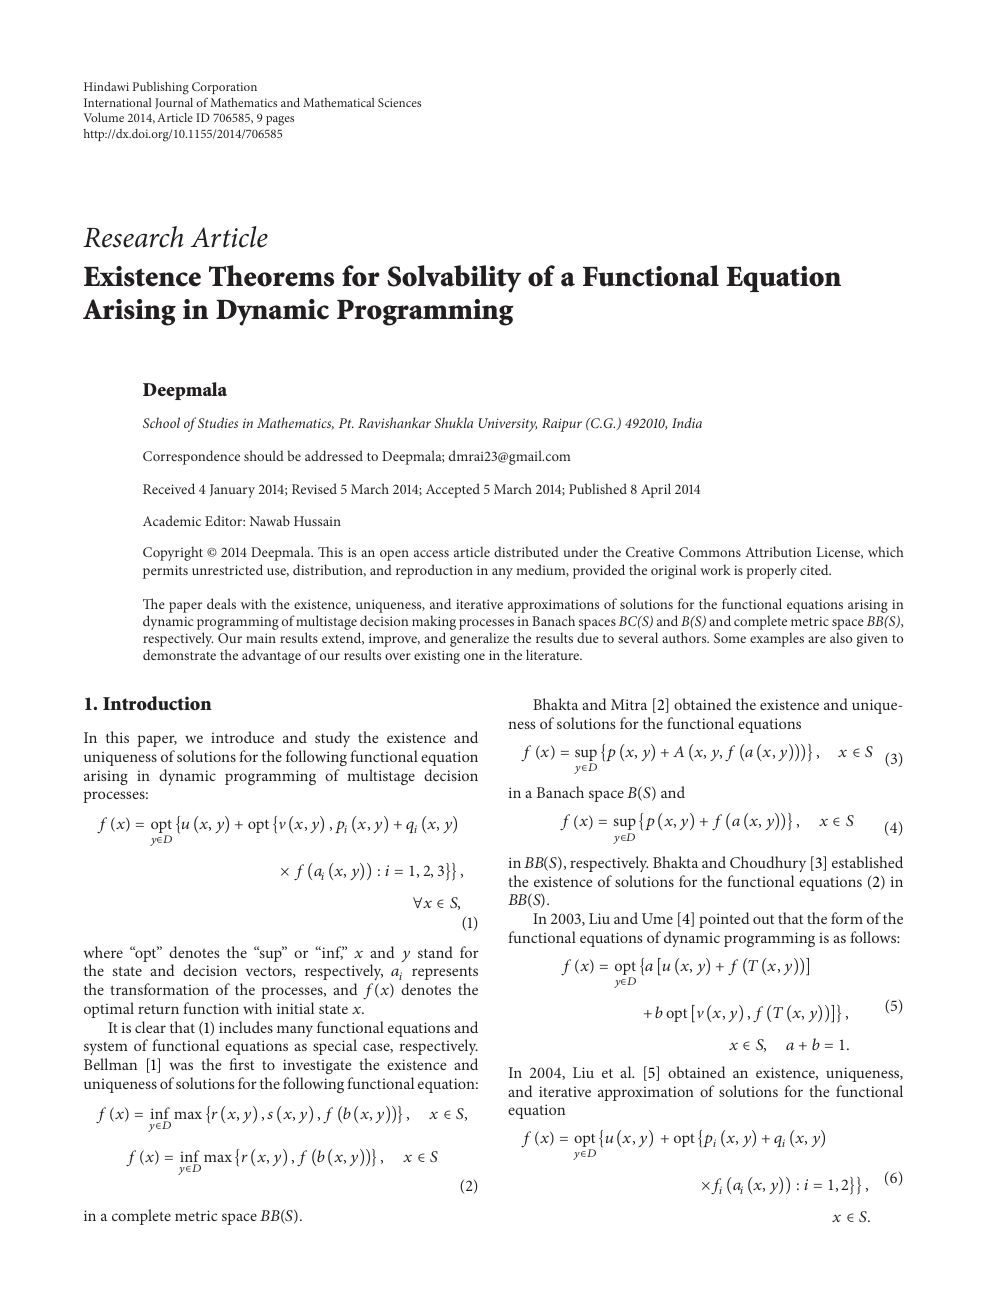 Existence Theorems For Solvability Of A Functional Equation Arising In Dynamic Programming Topic Of Research Paper In Mathematics Download Scholarly Article Pdf And Read For Free On Cyberleninka Open Science Hub